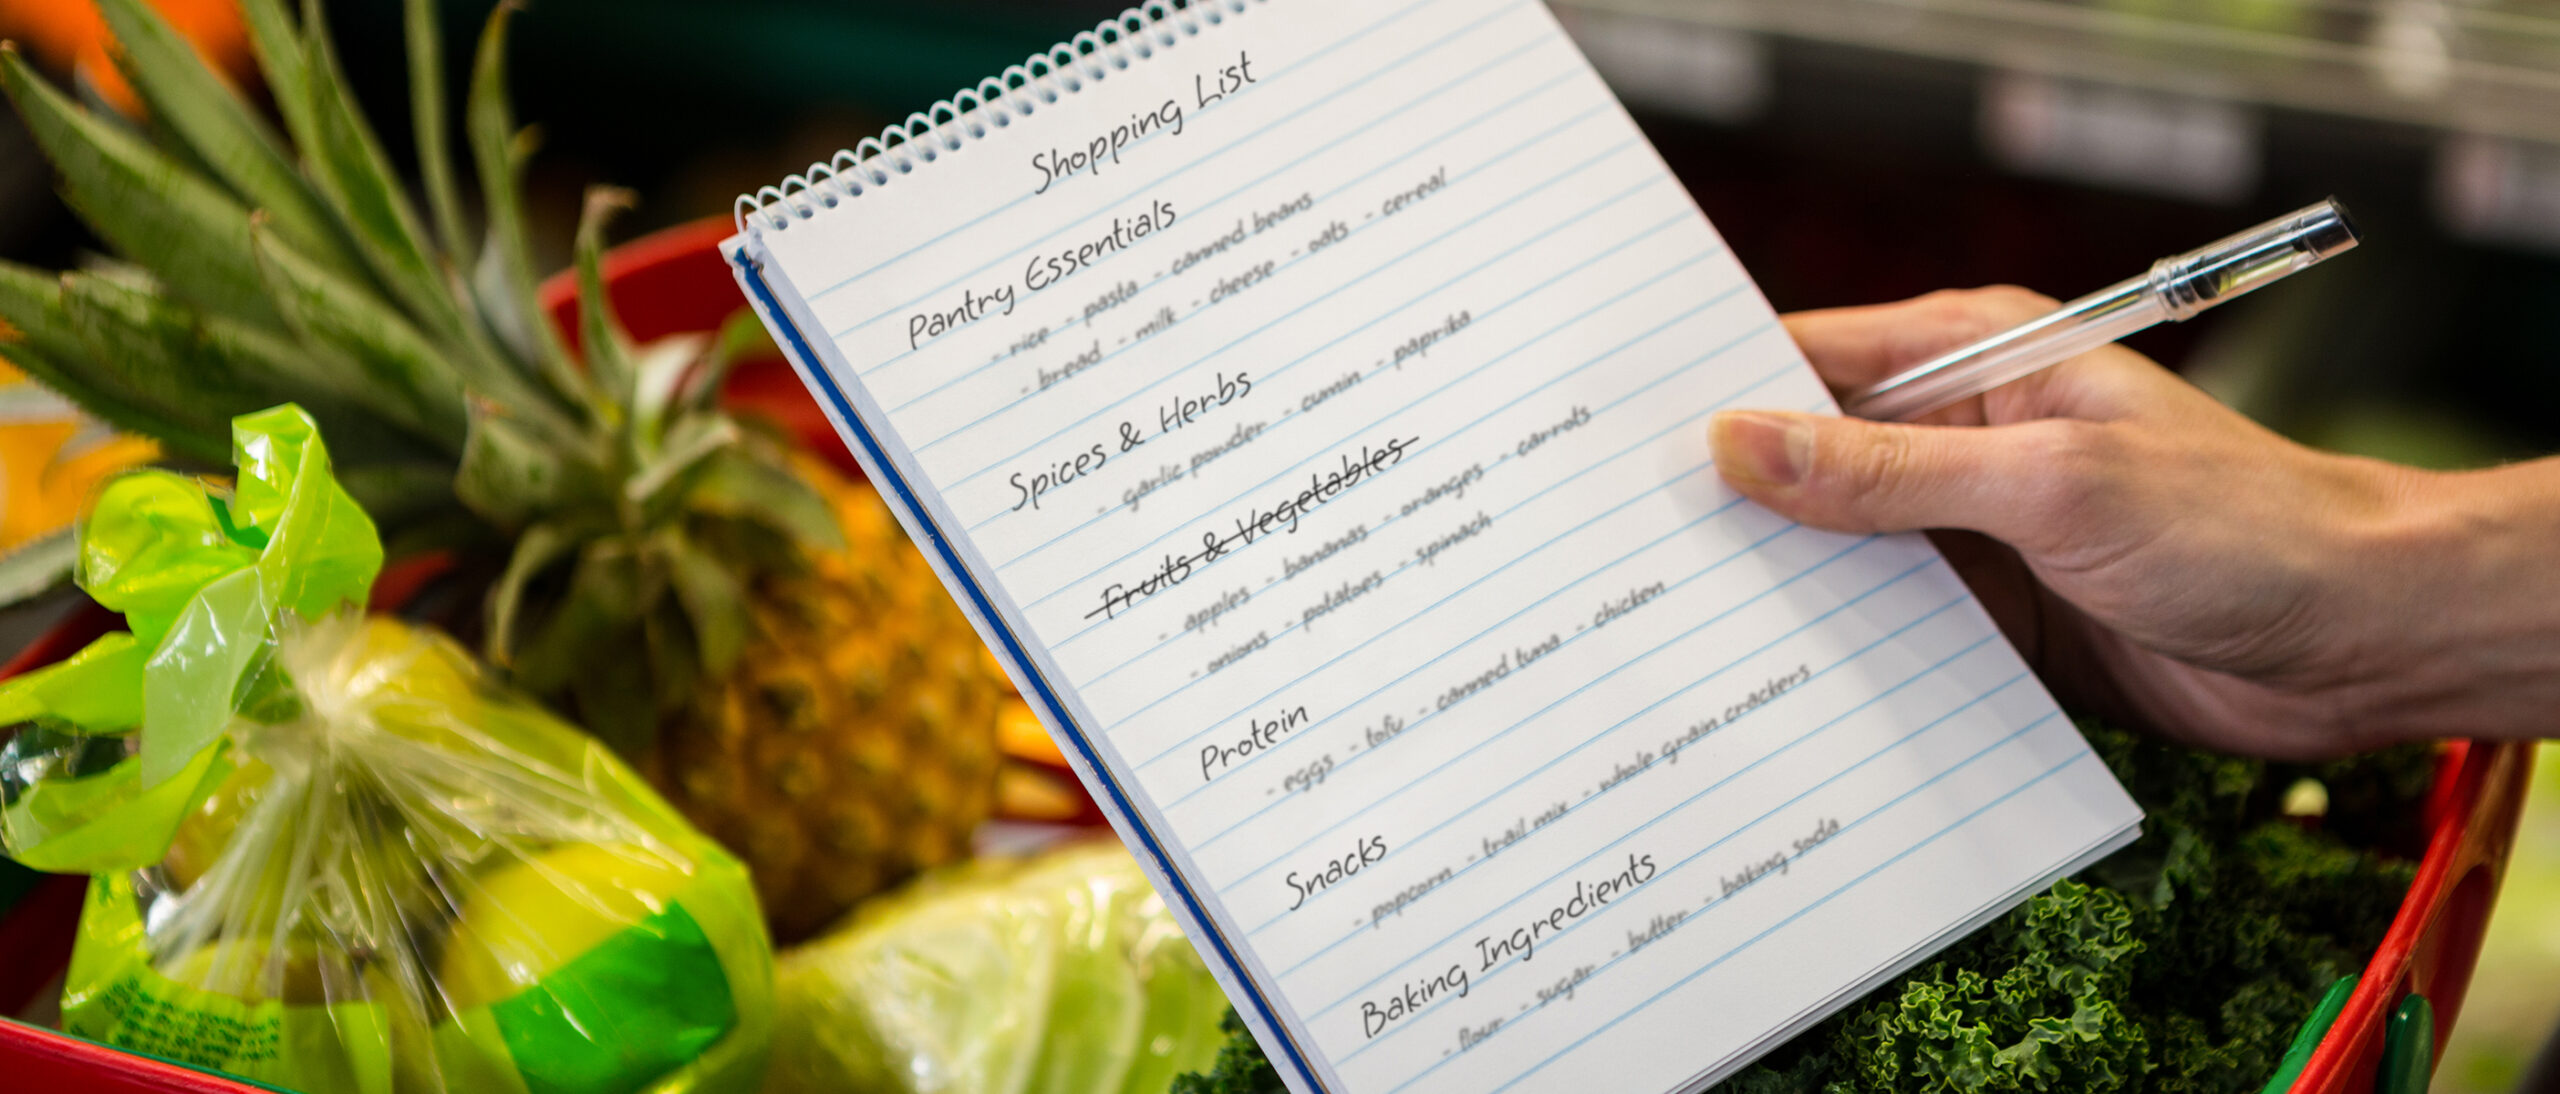 Shop Smart, Eat Well, and Save Big: Grocery List for Family on a Budget